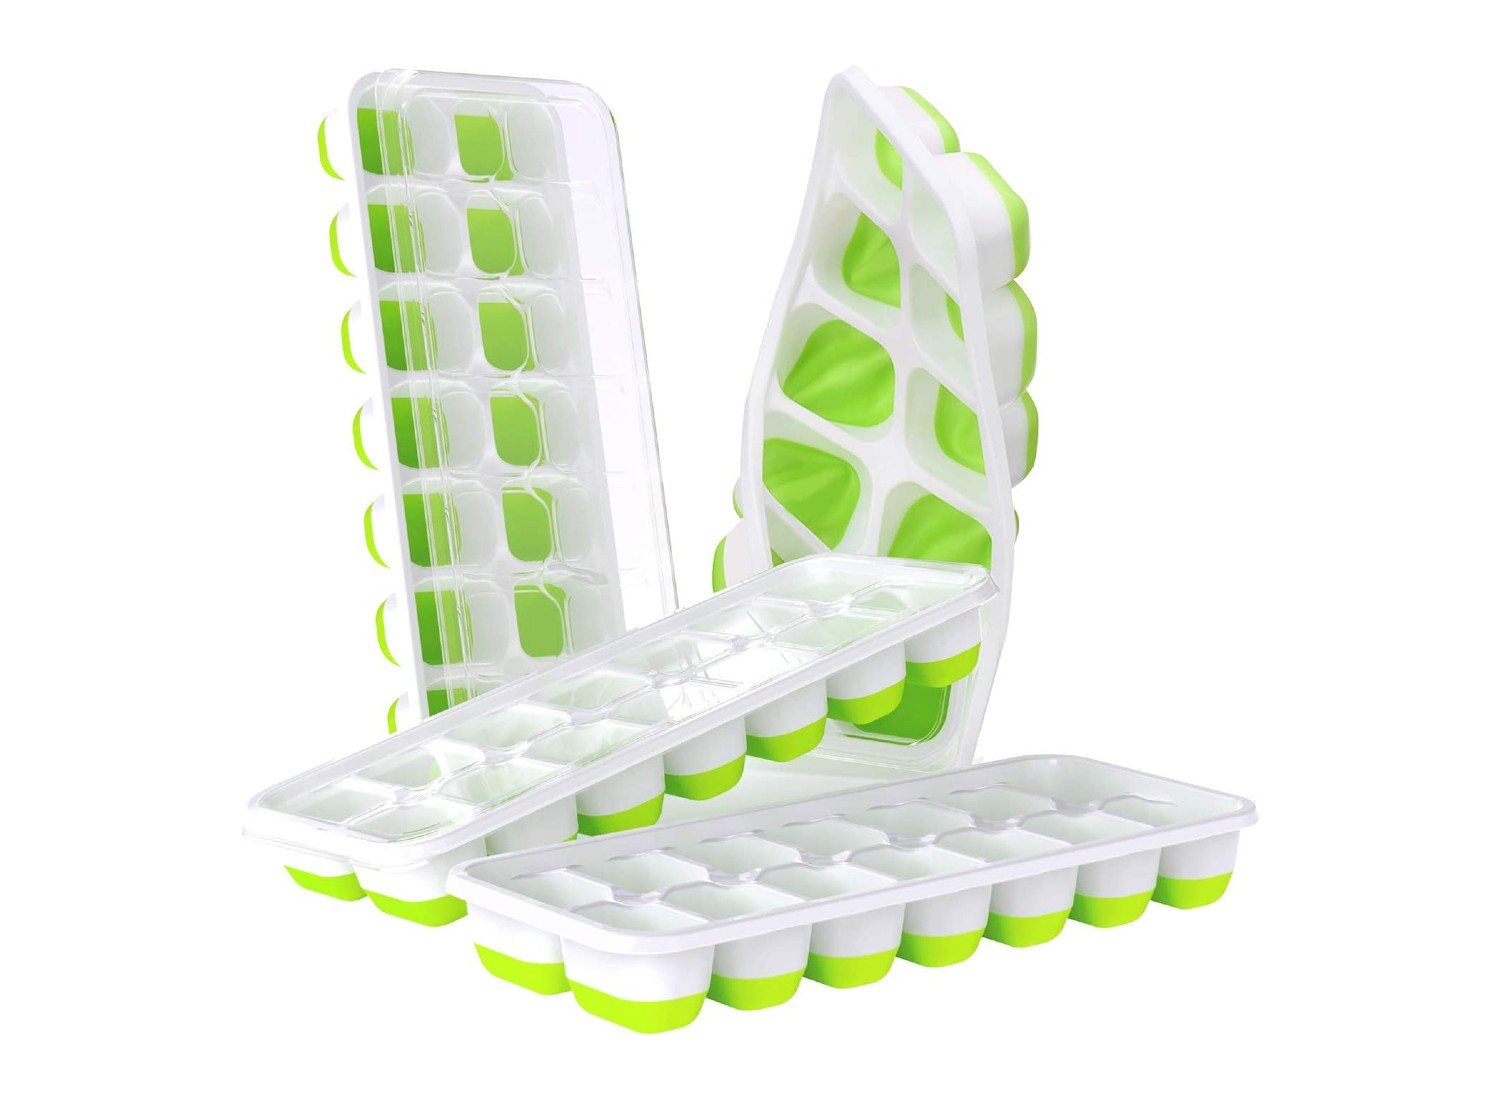 https://www.brit.co/reviews/wp-content/uploads/2023/05/DOQAUS-ice-cube-trays-britco.jpg